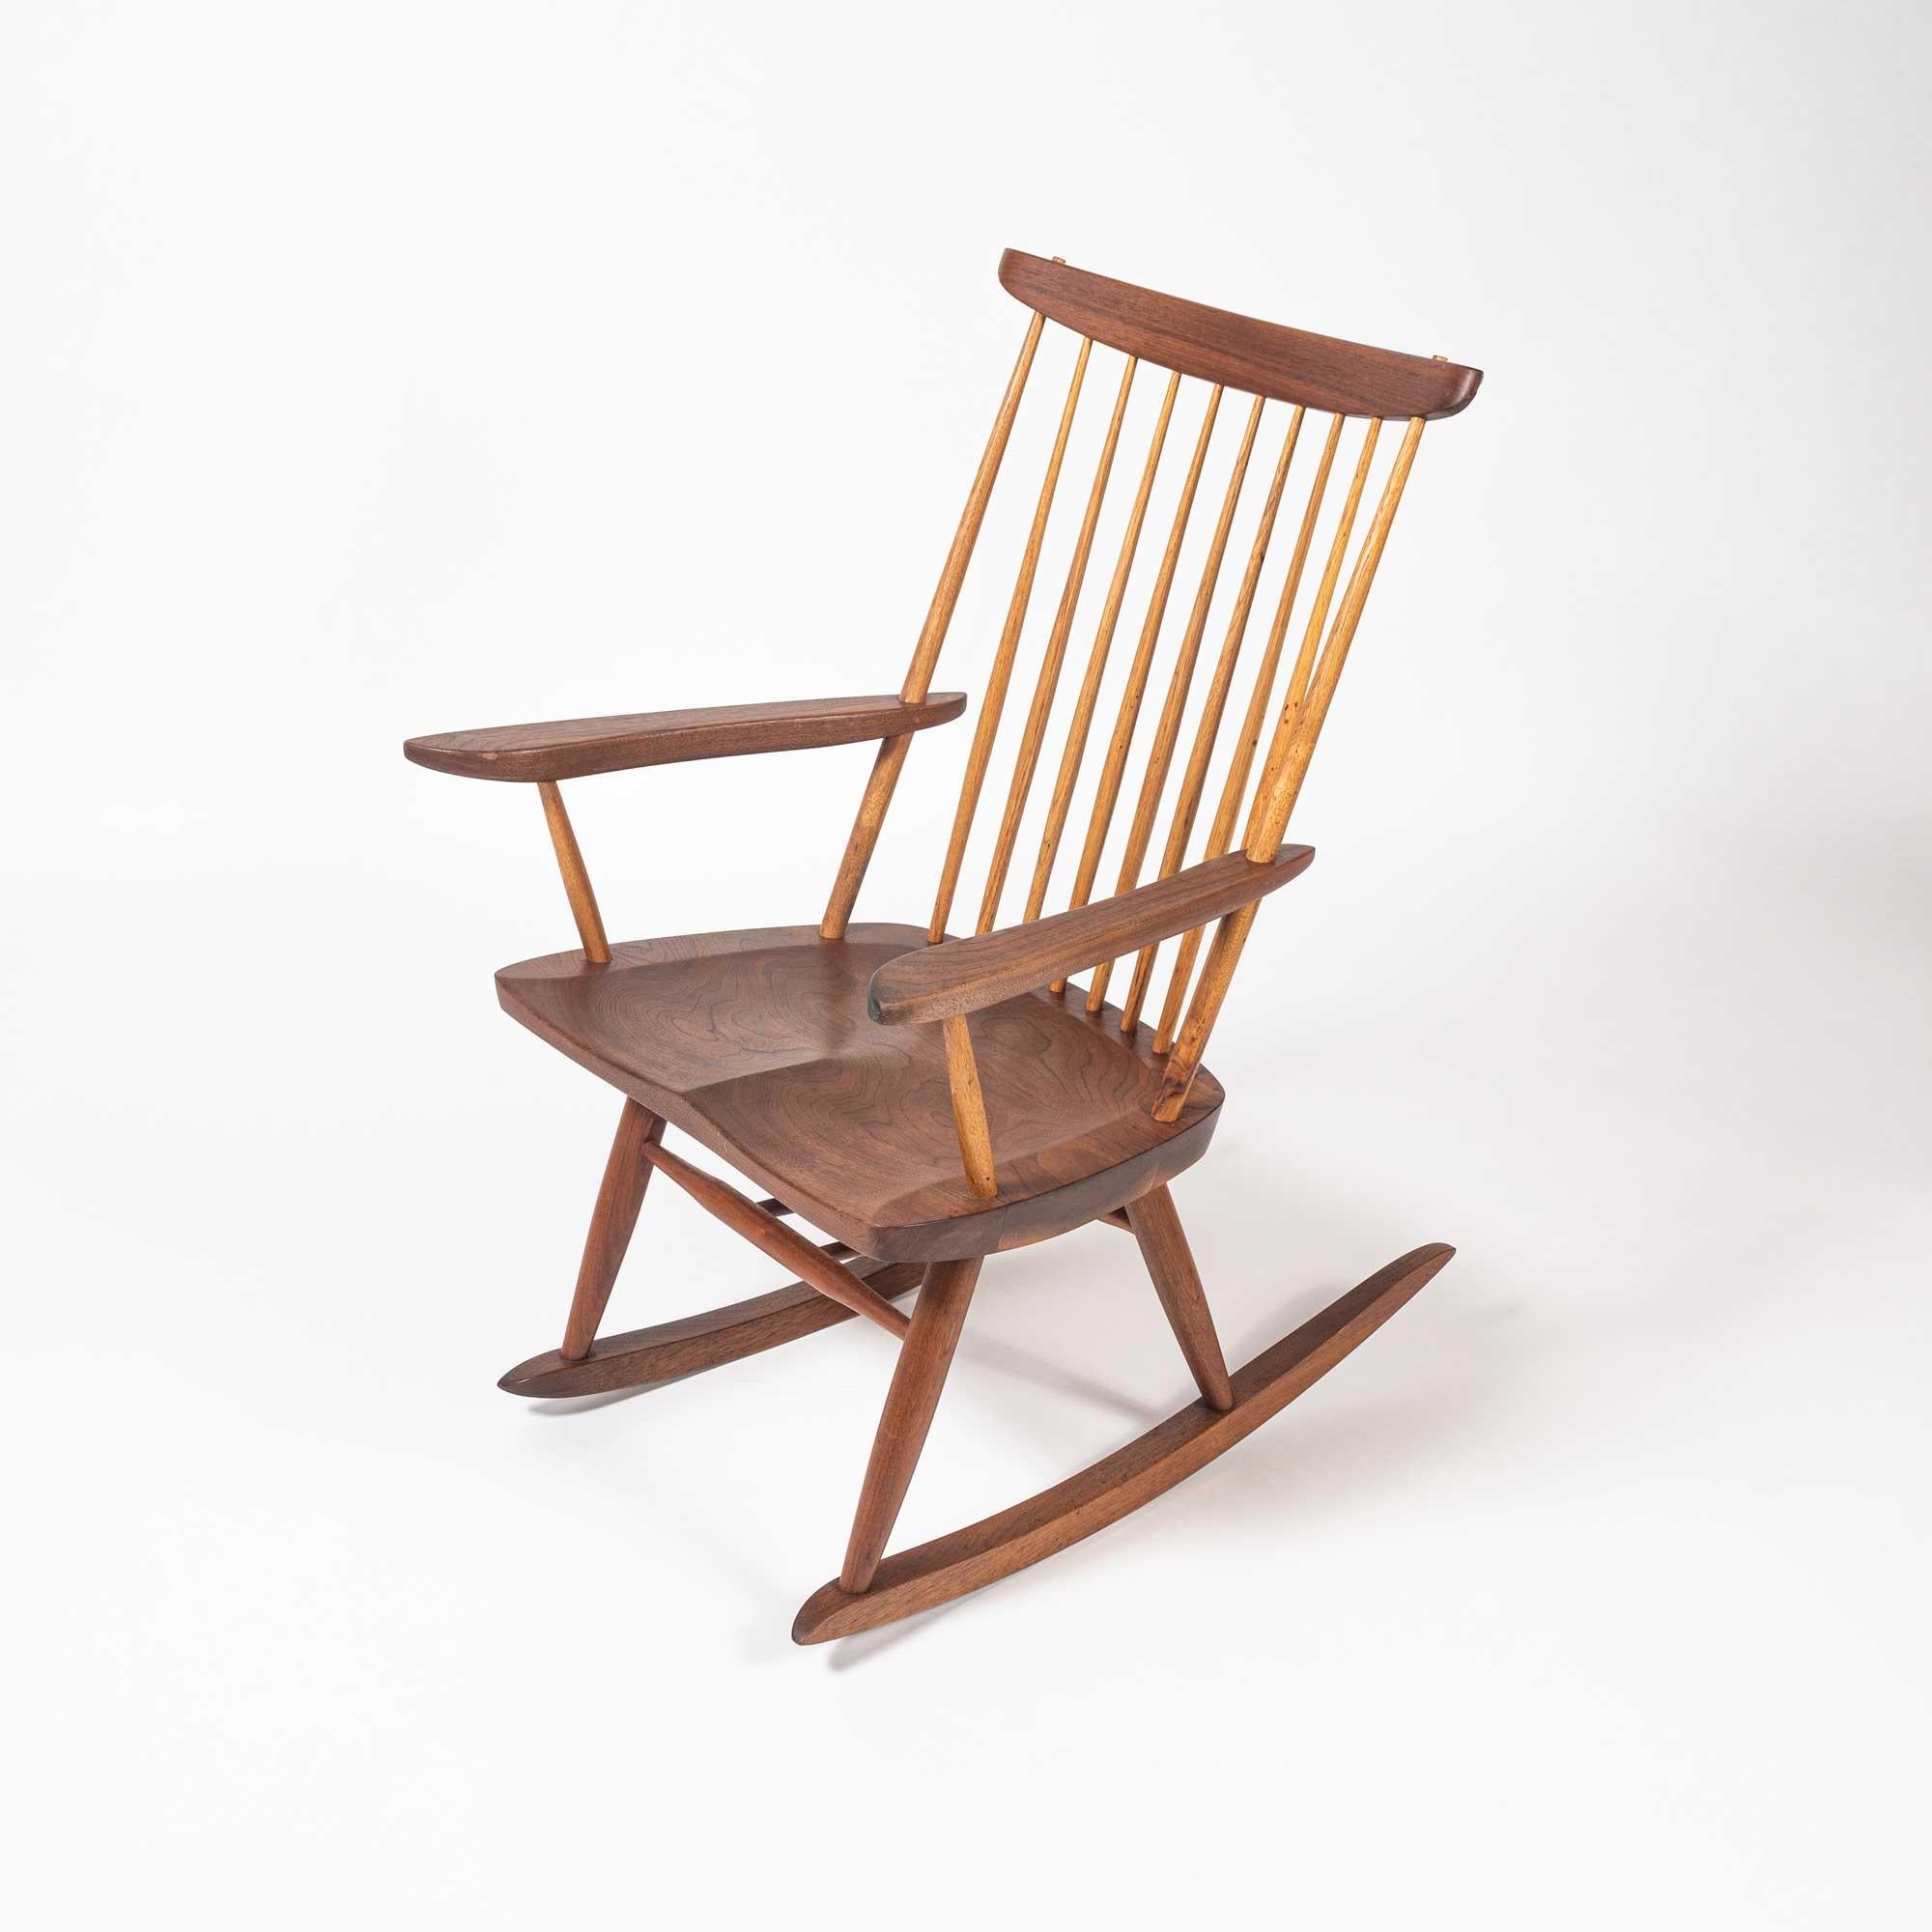 Rocker in walnut with hickory spindles and sculpted arms by George Nakashima, circa 1994. Signature on the bottom of the chair. A Washington State native, master woodworker and M.I.T.-trained architect, George Nakashima was the leading light of the